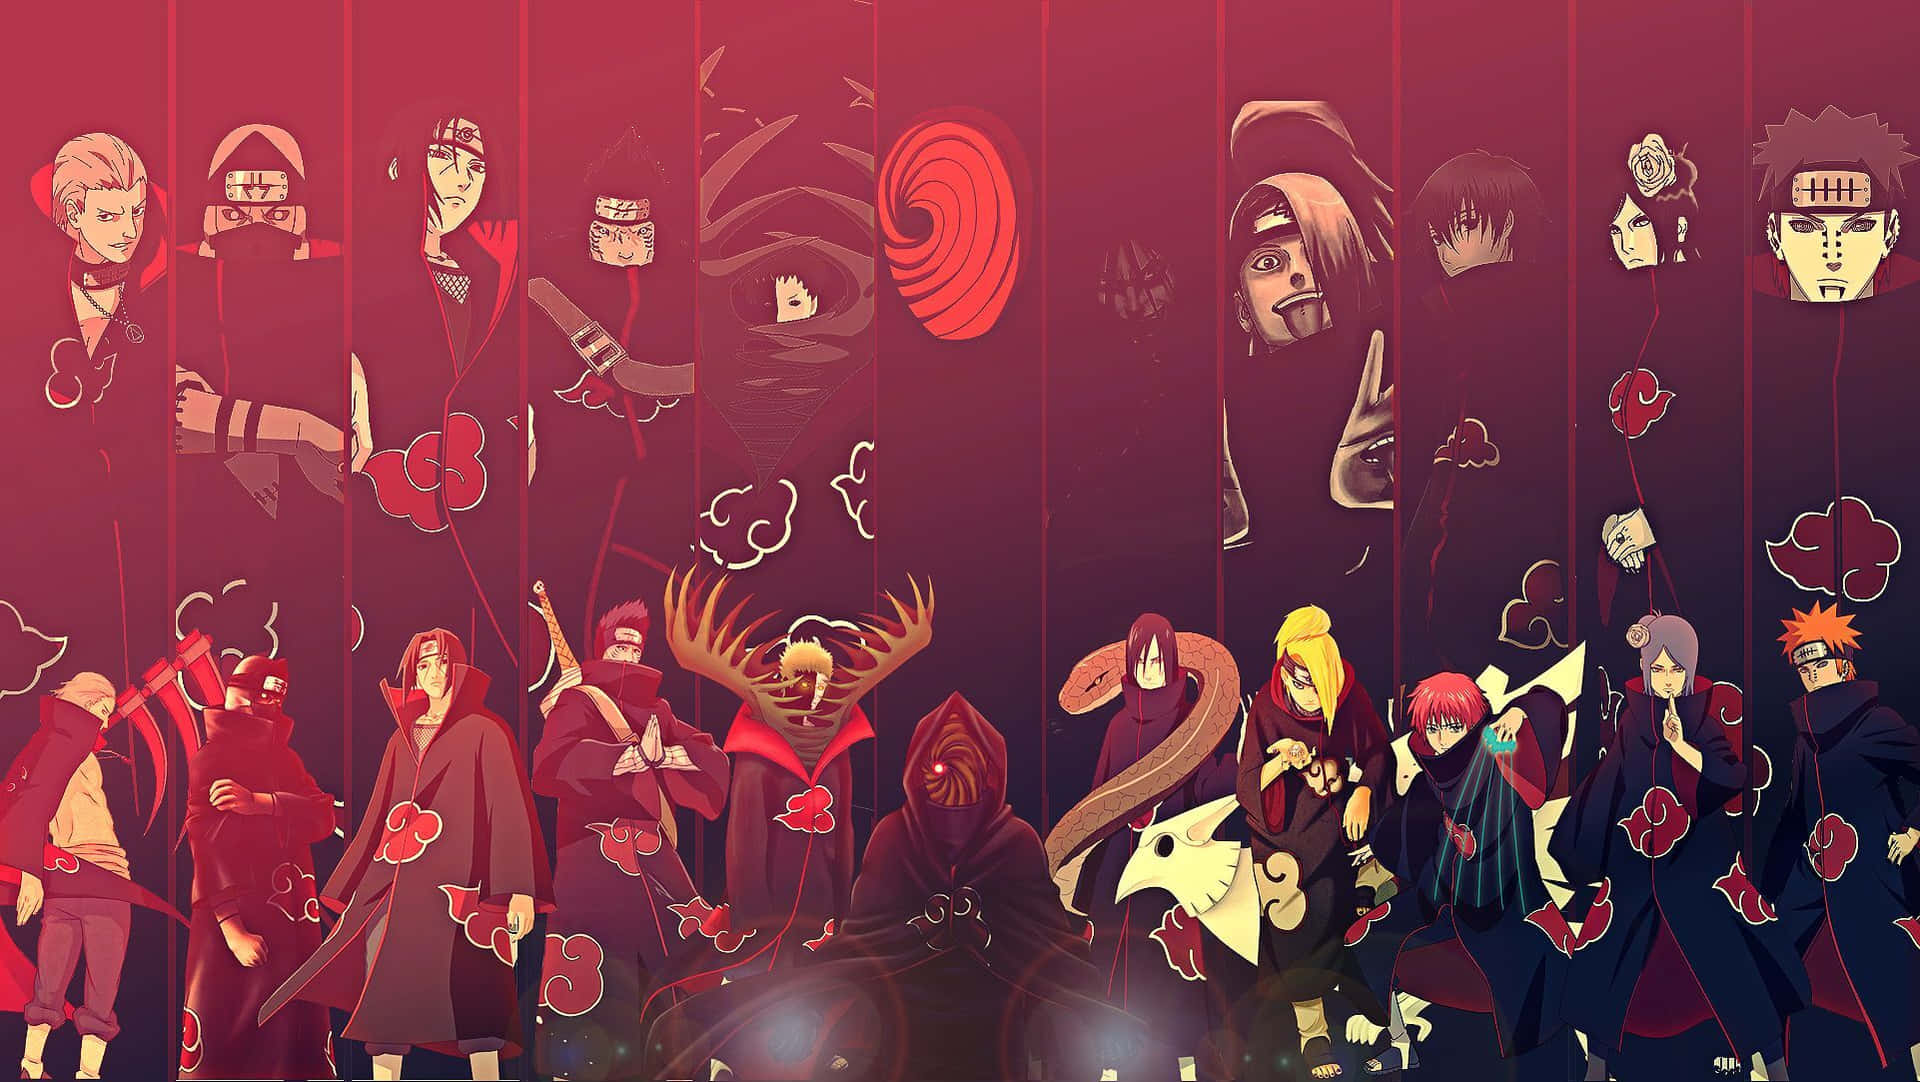 The Akatsuki - Infamous Crime Syndicate from Naruto Wallpaper